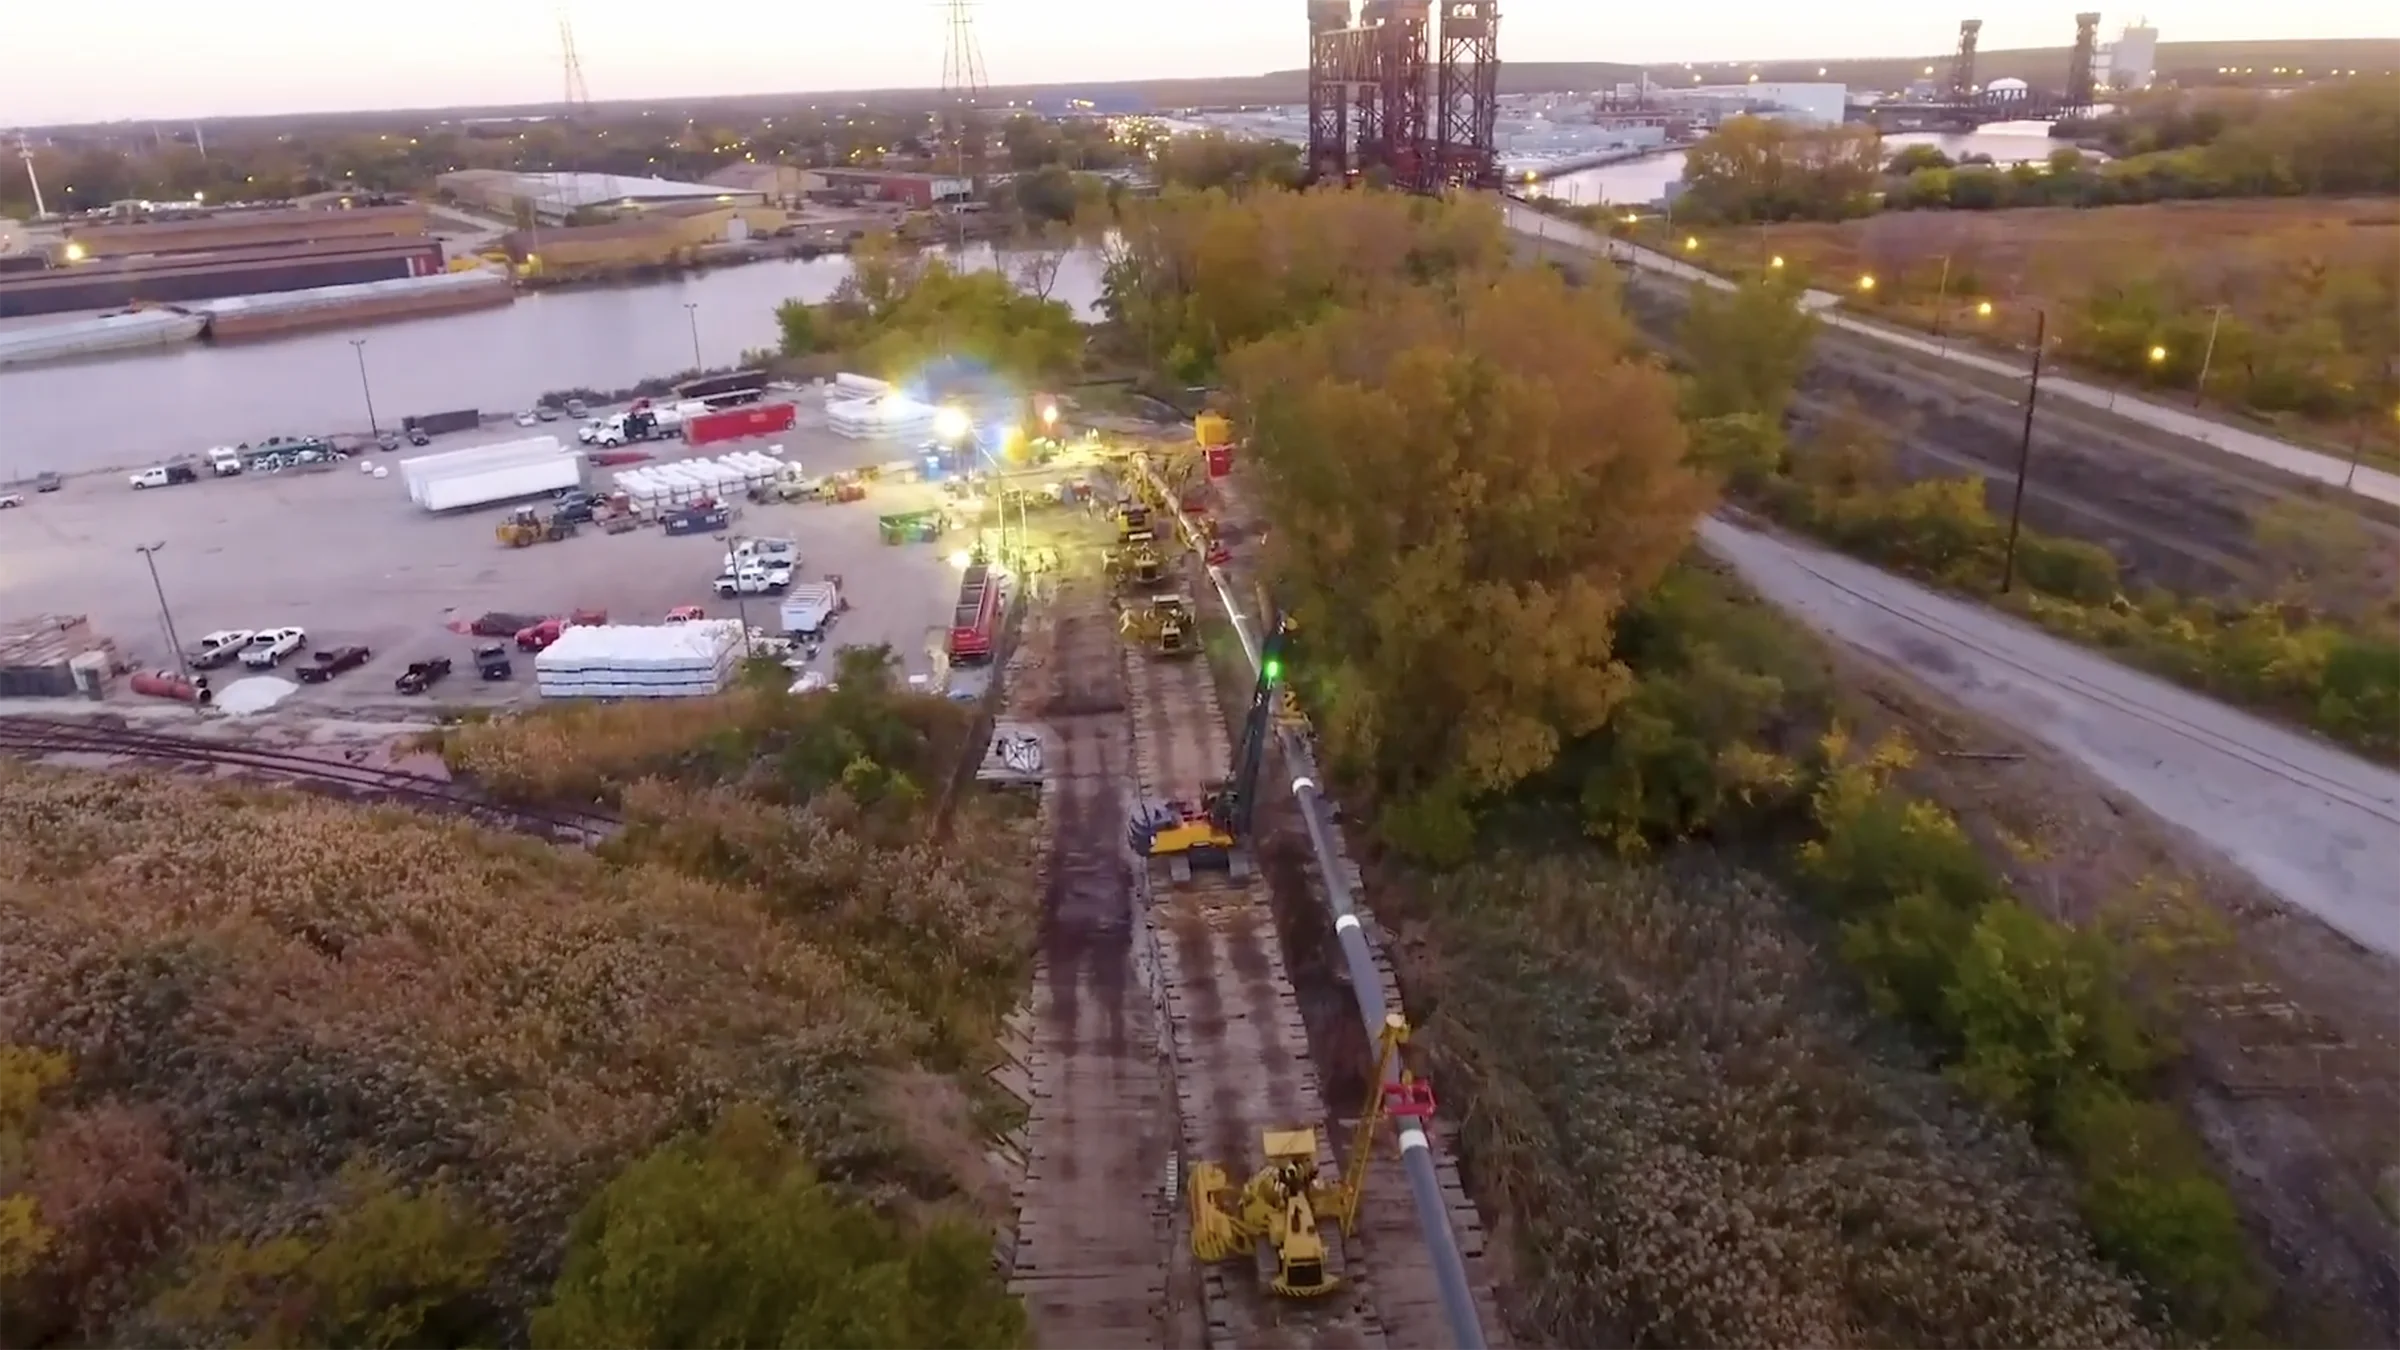 HDD drill site setup along the Mississippi River